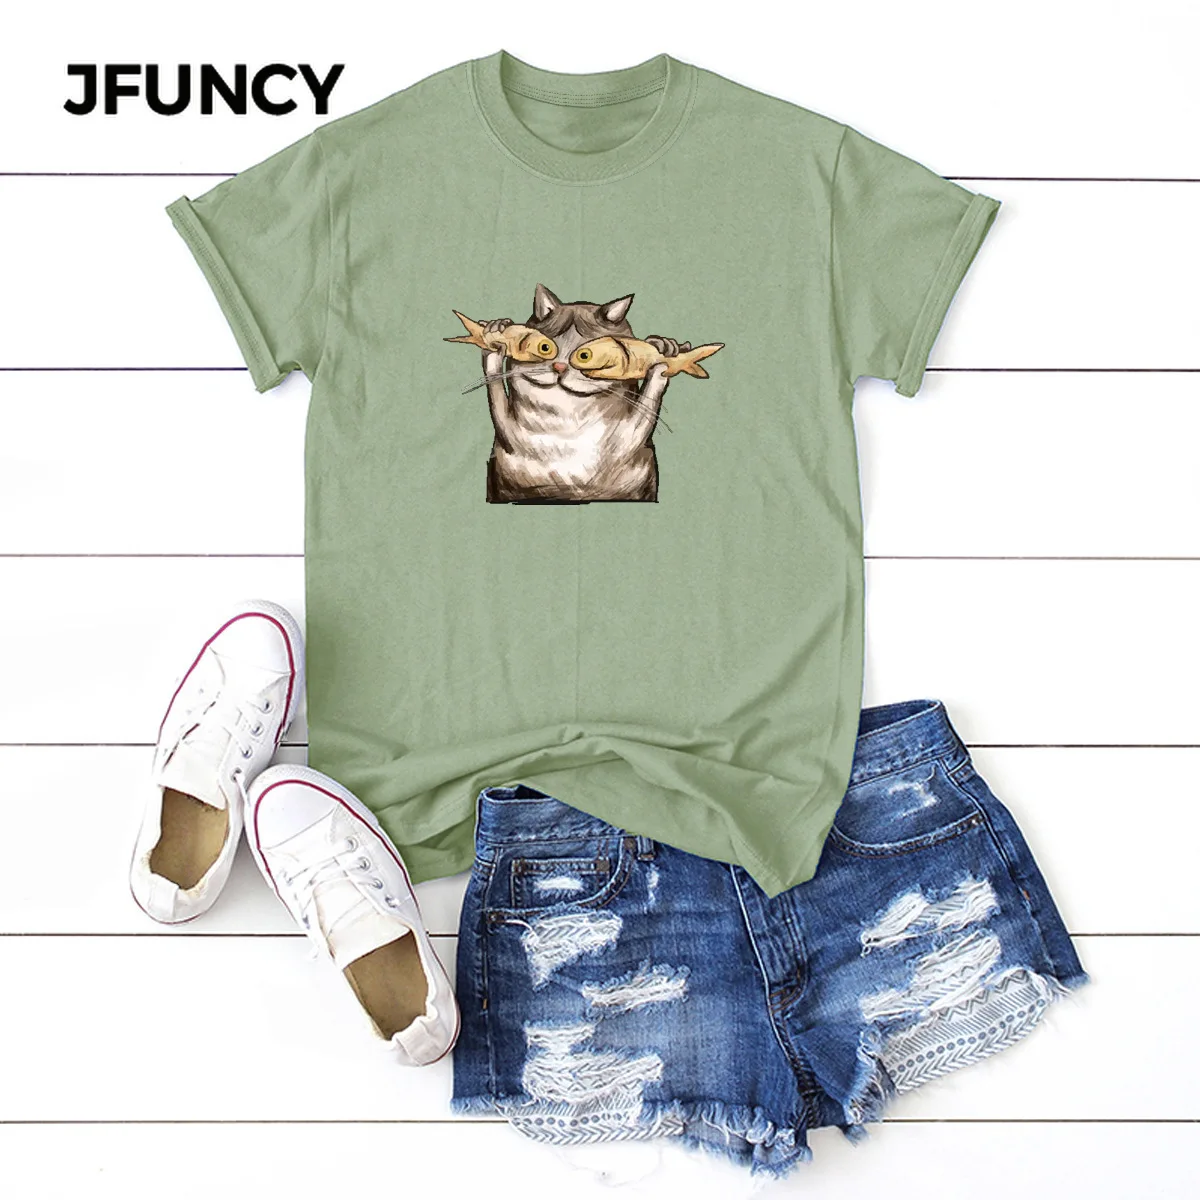 

JFUNCY Funny Cats Graphic Tees Women Tops 100% Cotton Summer T-shirt Plus Size Short Sleeve Woman Shirts Lady Casual Tshirt